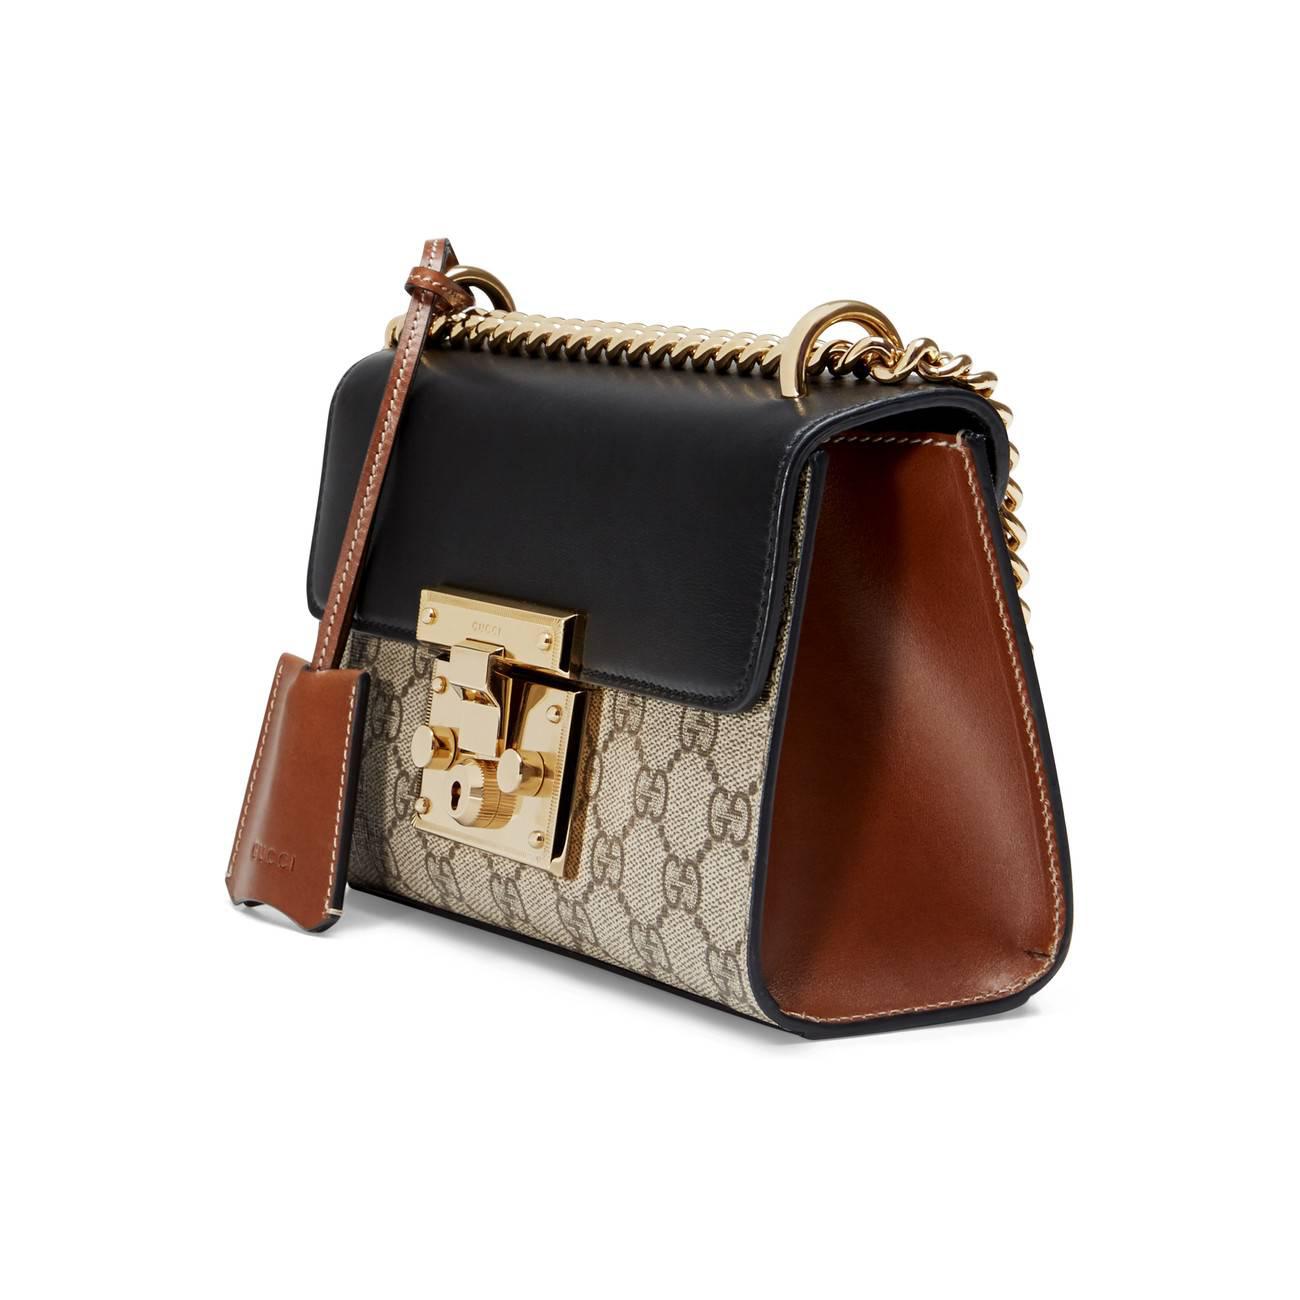 Gucci Canvas Padlock Small GG Shoulder Bag in Brown - Lyst